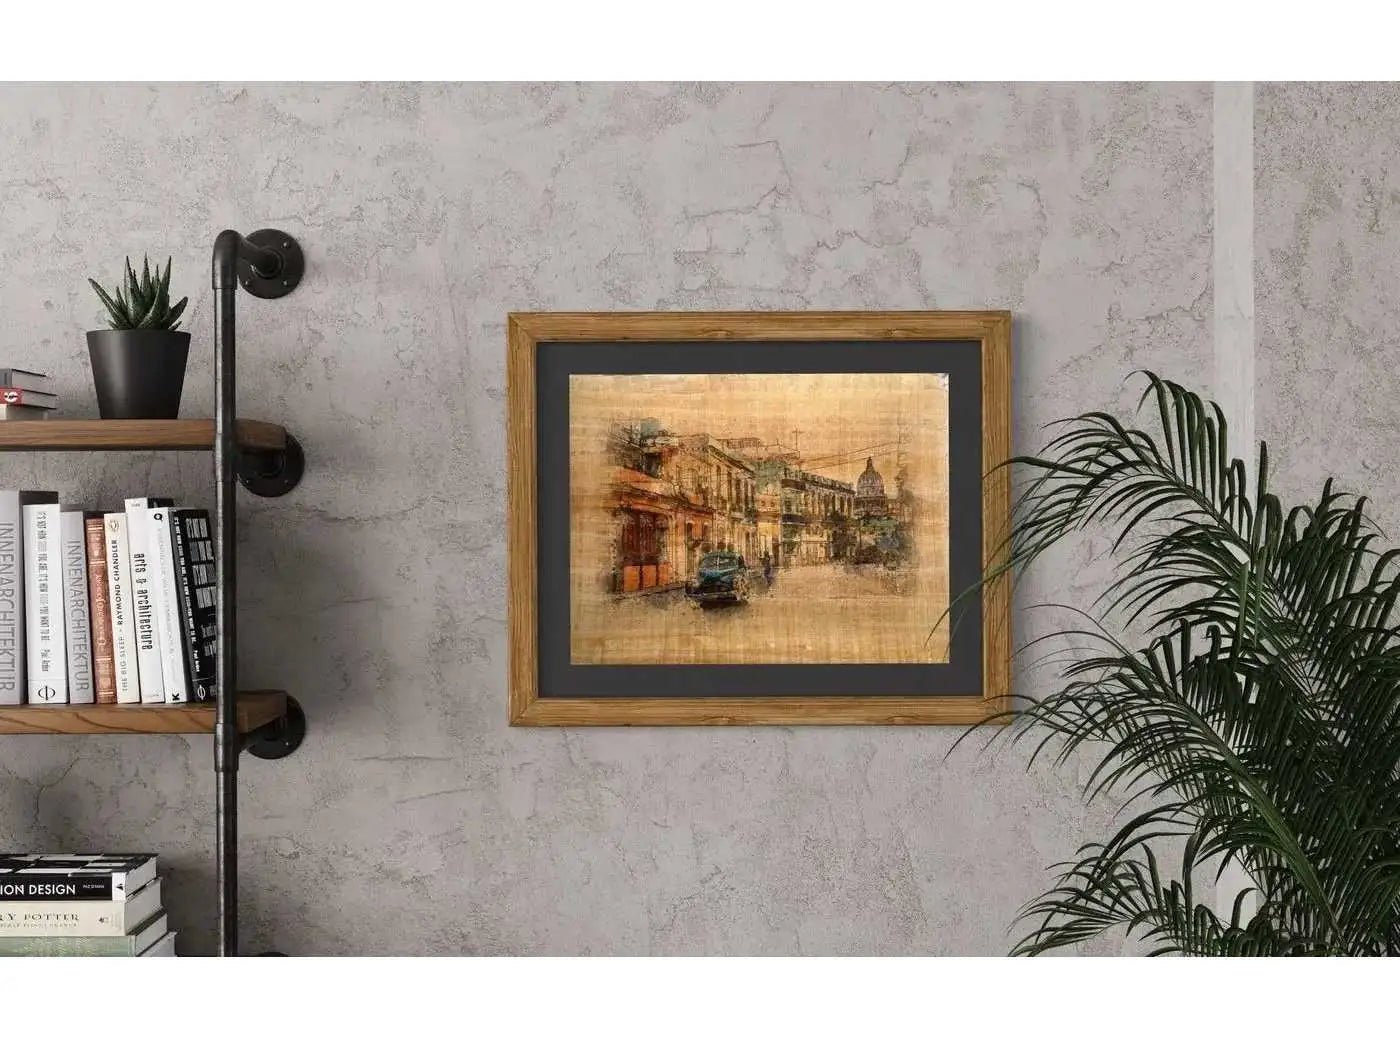 Havana Cuba Street Painting Sketch - Vintage Printing on Authentic Egyptian Papyrus Paper